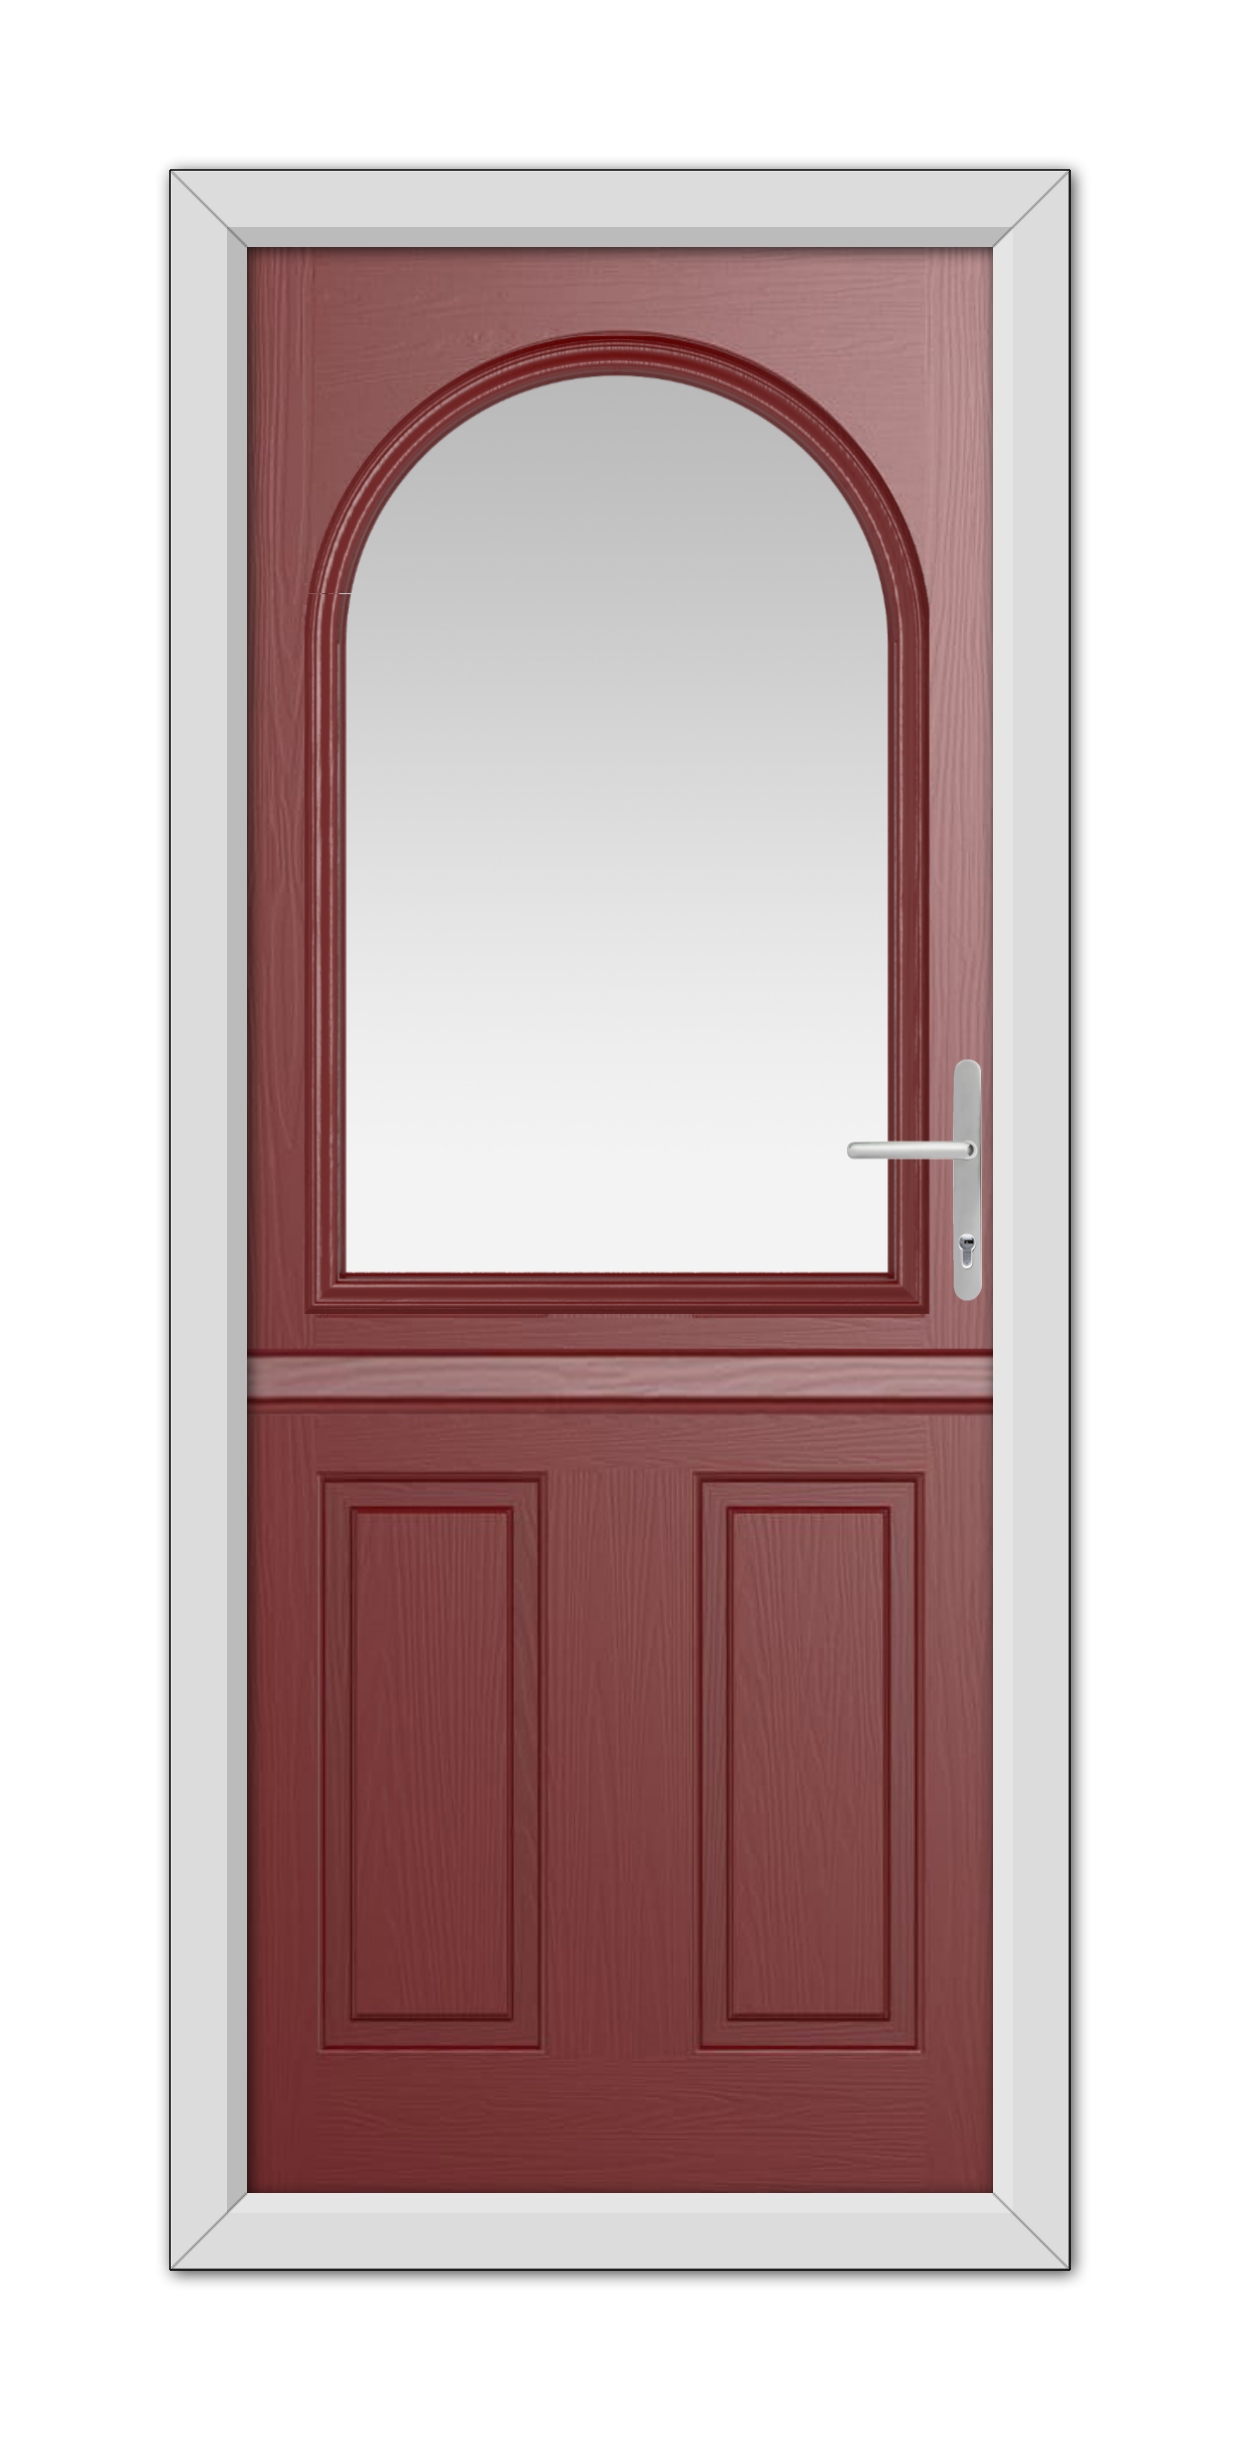 A Red Grafton Stable Composite Door 48mm Timber Core with an arched window at the top, featuring a white frame and handle, isolated on a white background.